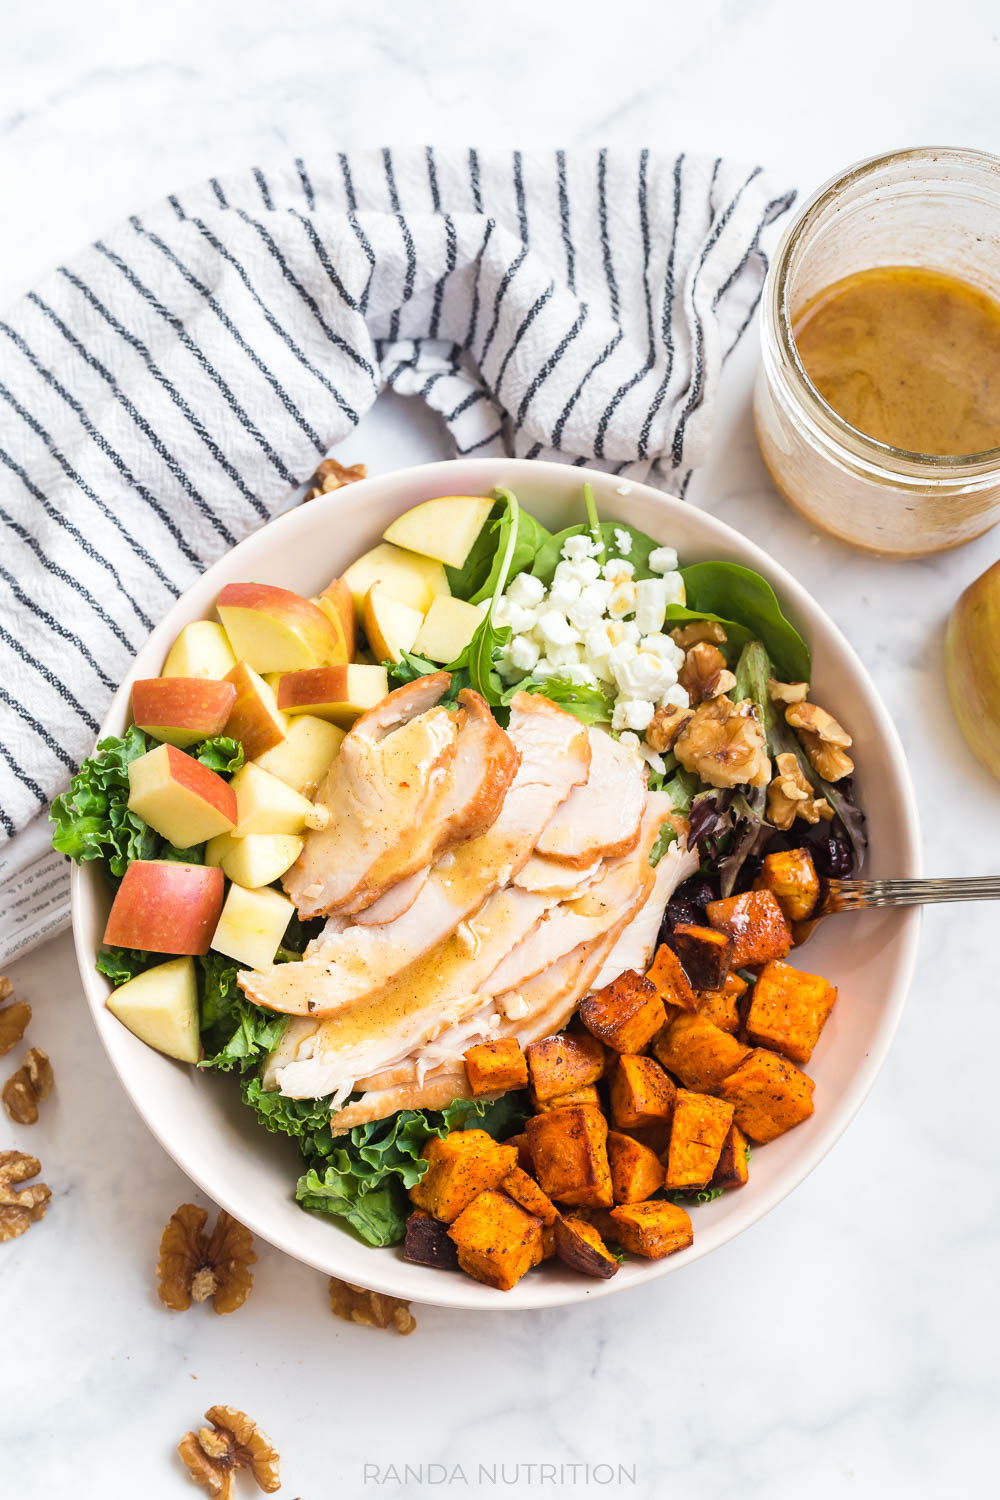 sliced leftover turkey over kale, apples, goat cheese, roasted sweet potatoes for a turkey salad recipe.